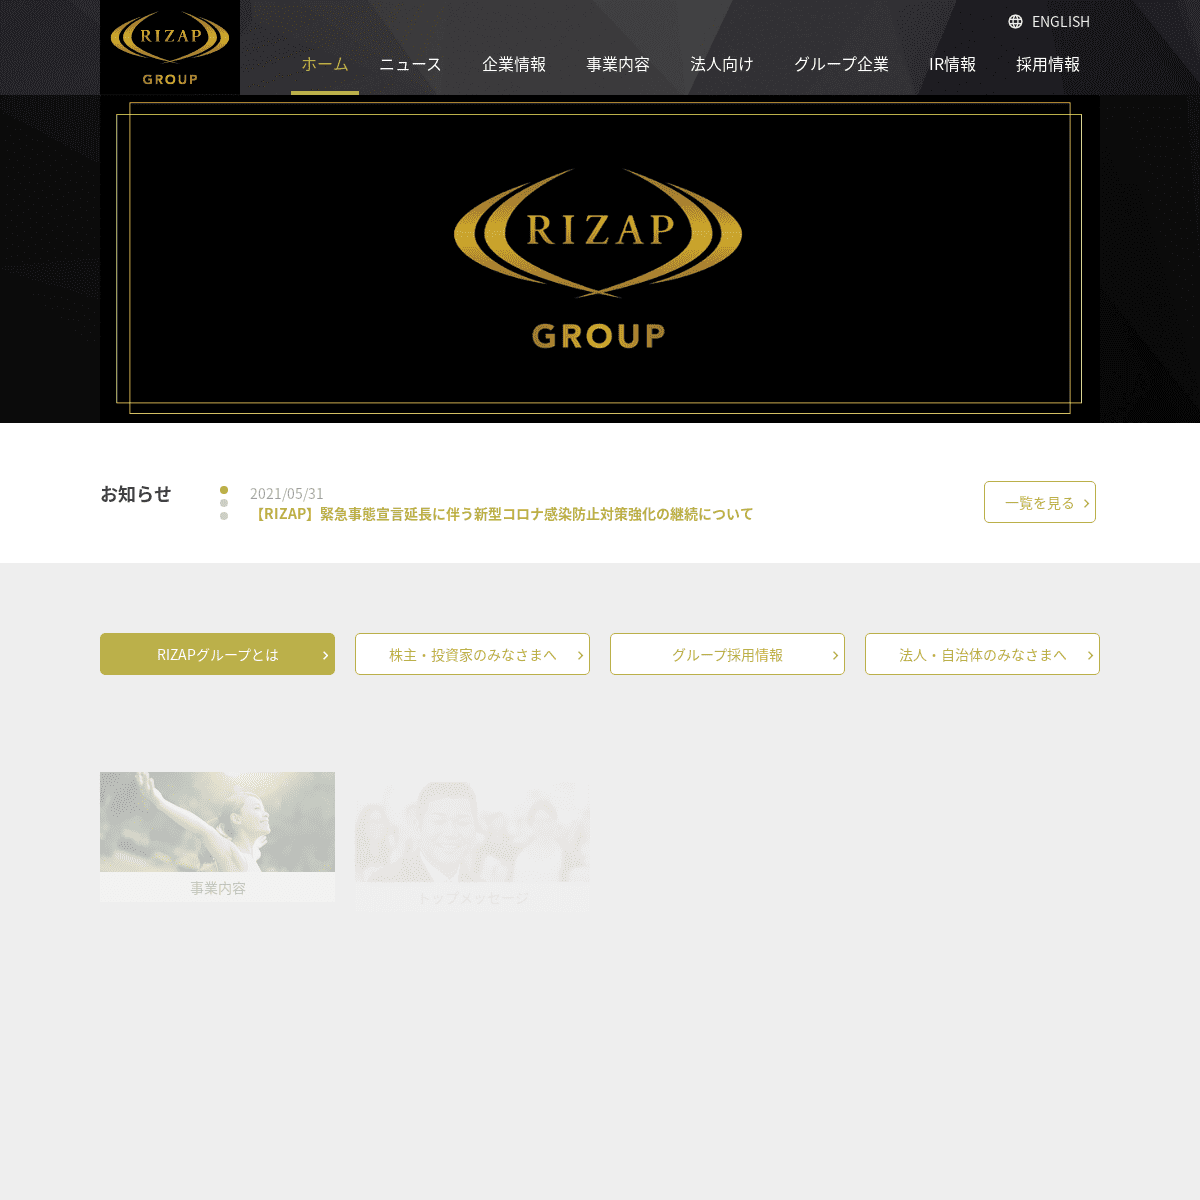 A complete backup of https://rizapgroup.com